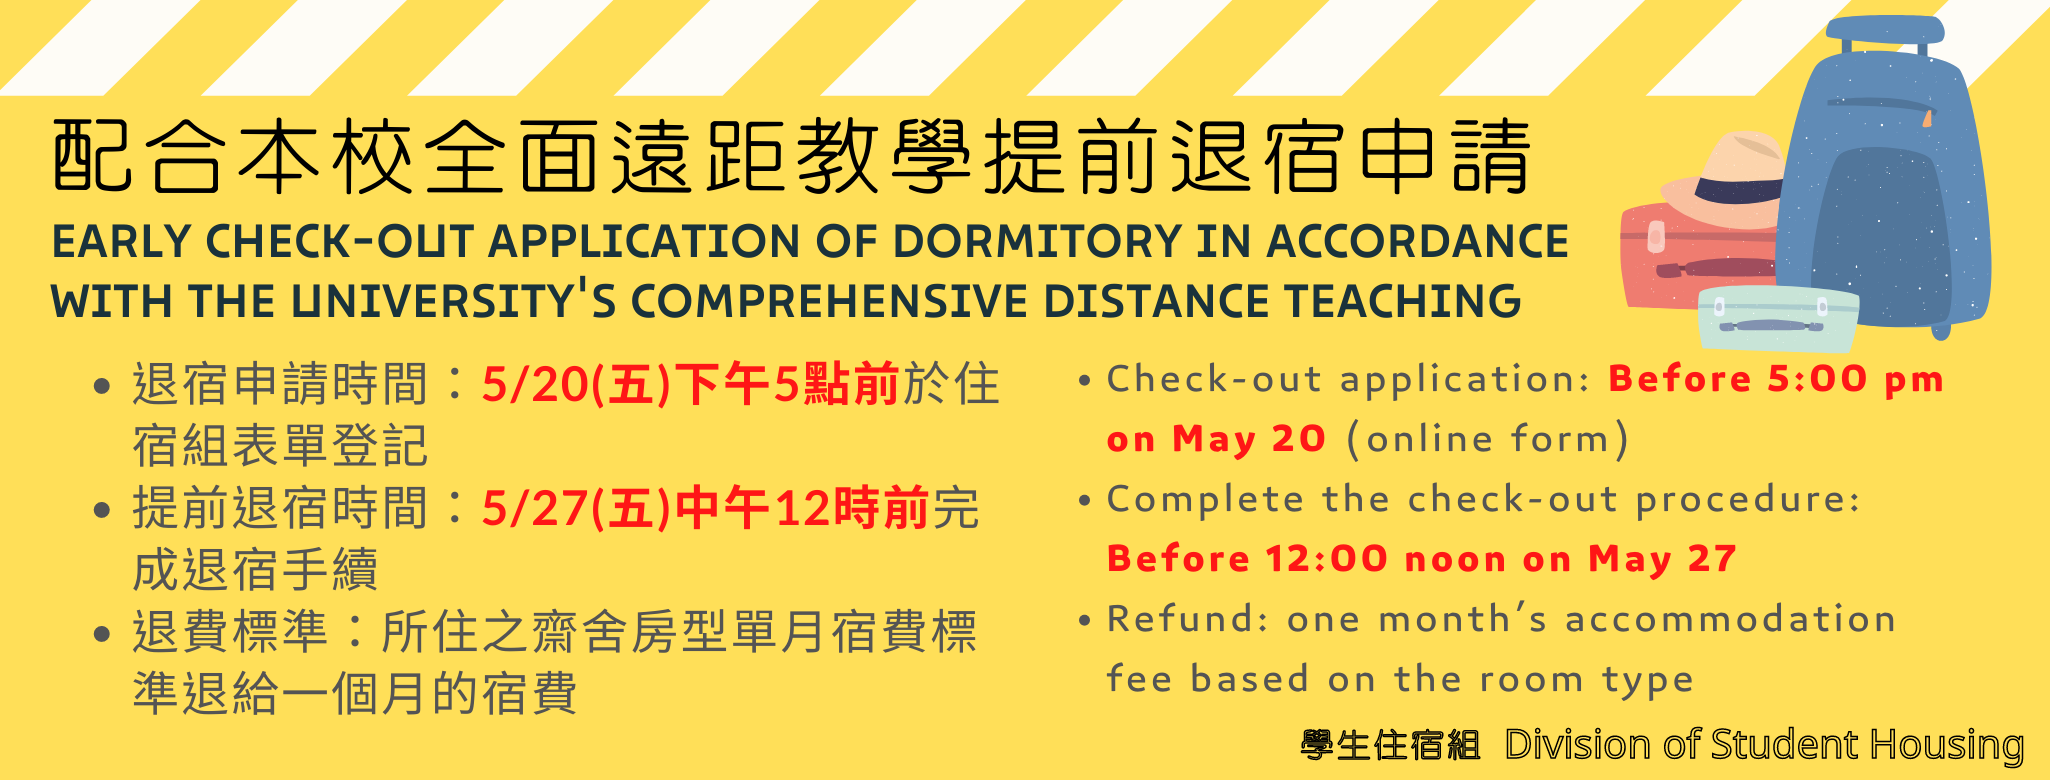 arly check-out of dormitory in accordance with the university's comprehensive distance teaching